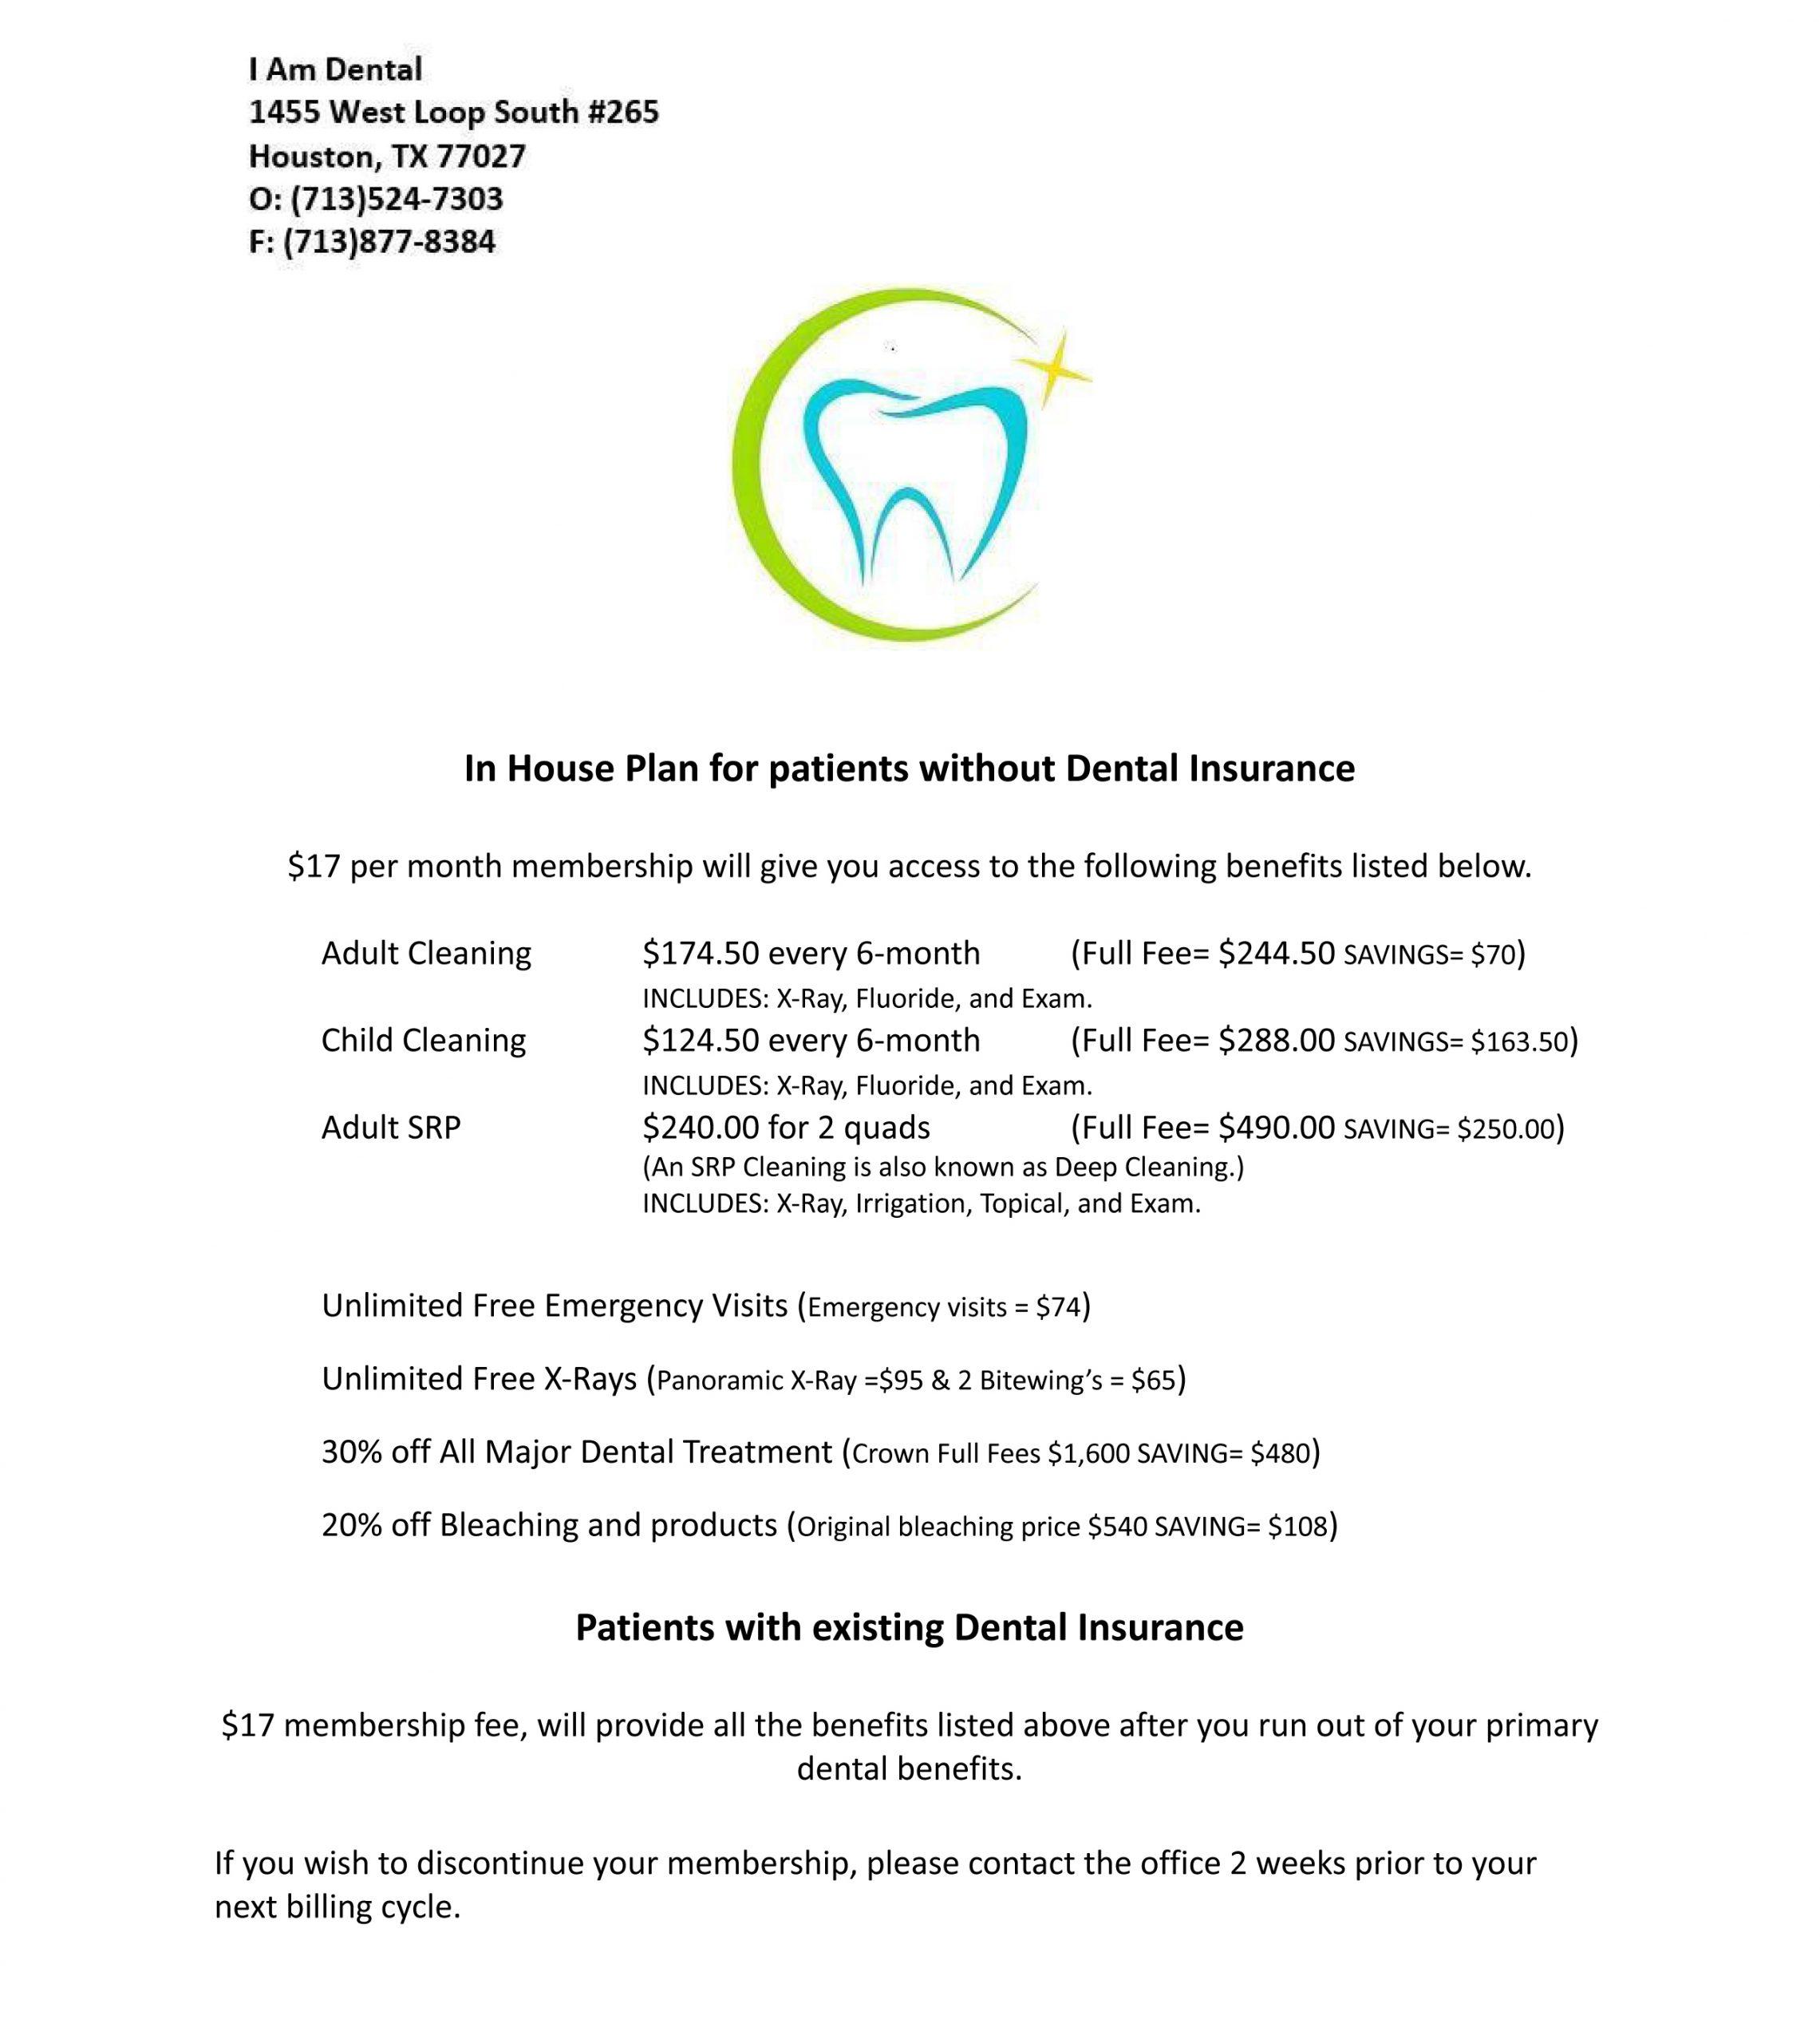 In House Plan for patients without Dental Insurance_updated.docx